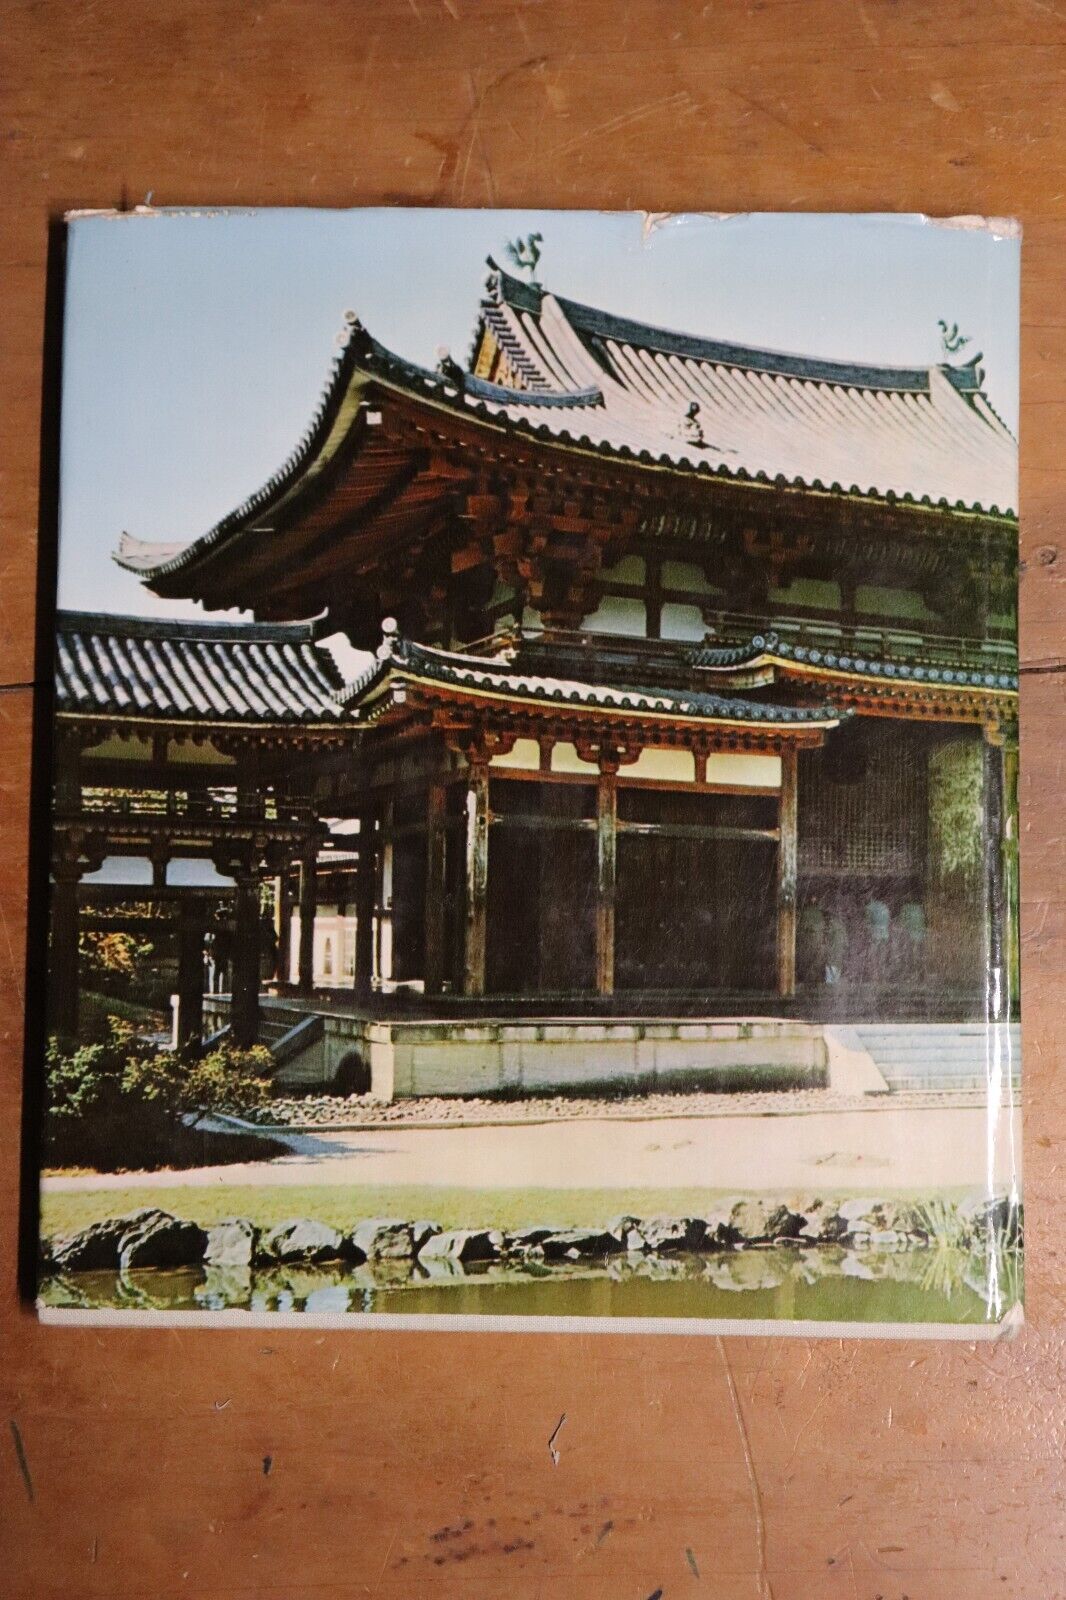 The Great Architecture Of Japan - 1970 - Architecture Book 1st Edition